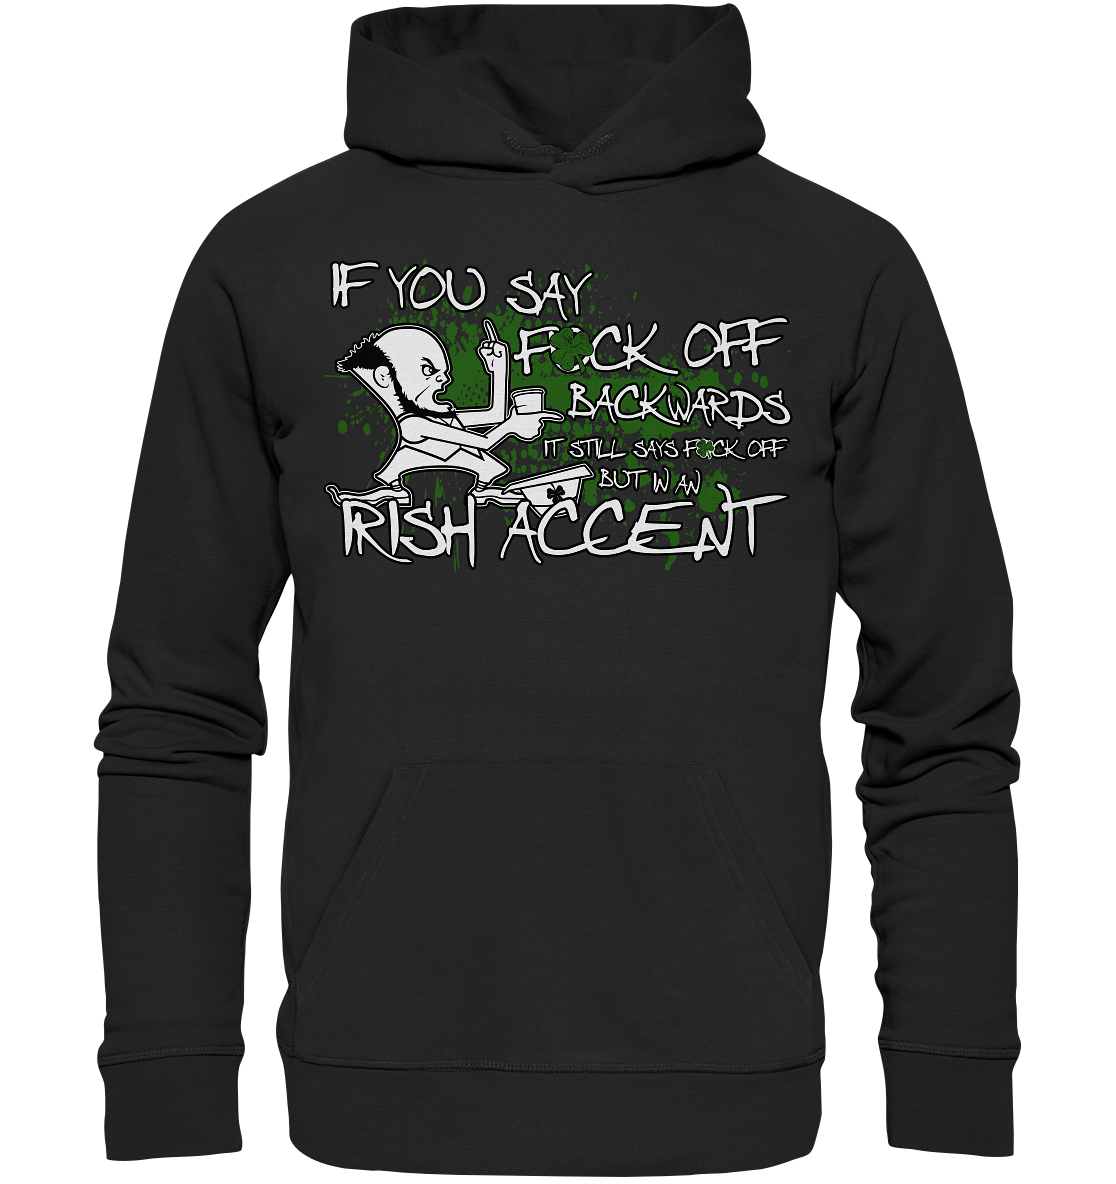 If You Say "Fuck Off" Backwards..." *censored version* - Premium Unisex Hoodie